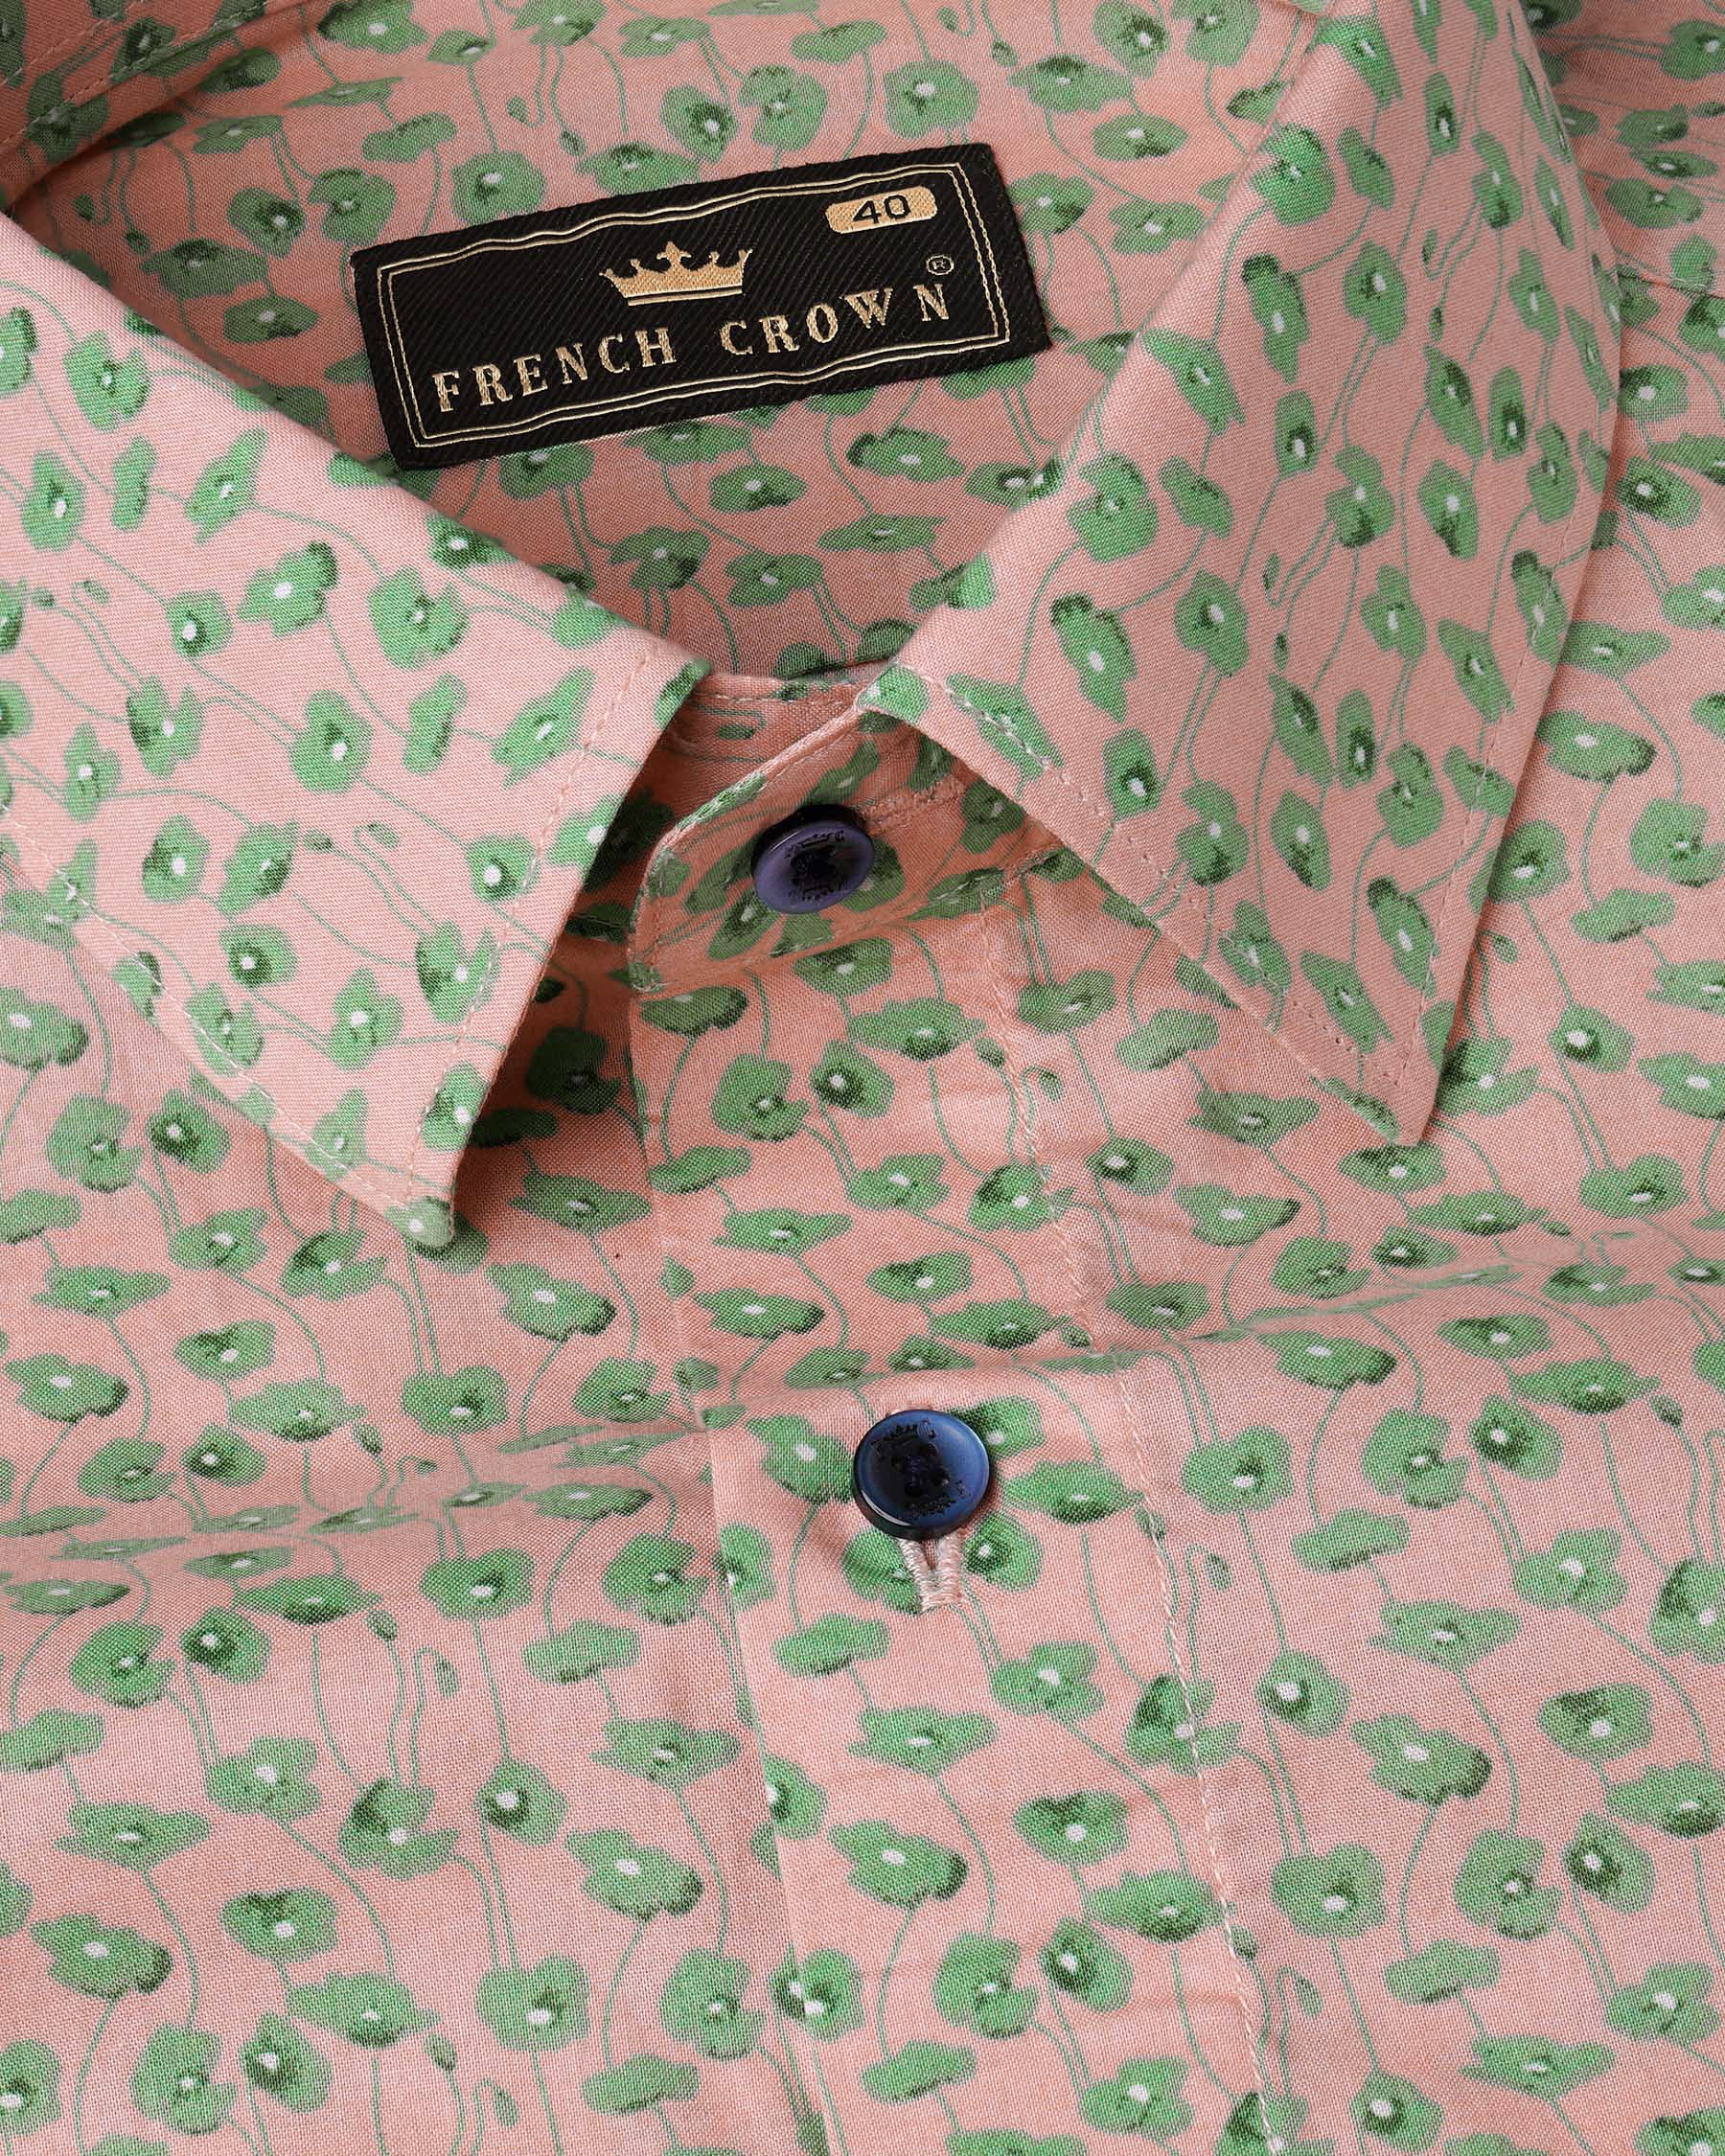 Shilo Pink With Glade Green Ditzy Florel Printed Premium Cotton Shirt8018-BLE-38,8018-BLE-H-38,8018-BLE-39,8018-BLE-H-39,8018-BLE-40,8018-BLE-H-40,8018-BLE-42,8018-BLE-H-42,8018-BLE-44,8018-BLE-H-44,8018-BLE-46,8018-BLE-H-46,8018-BLE-48,8018-BLE-H-48,8018-BLE-50,8018-BLE-H-50,8018-BLE-52,8018-BLE-H-52